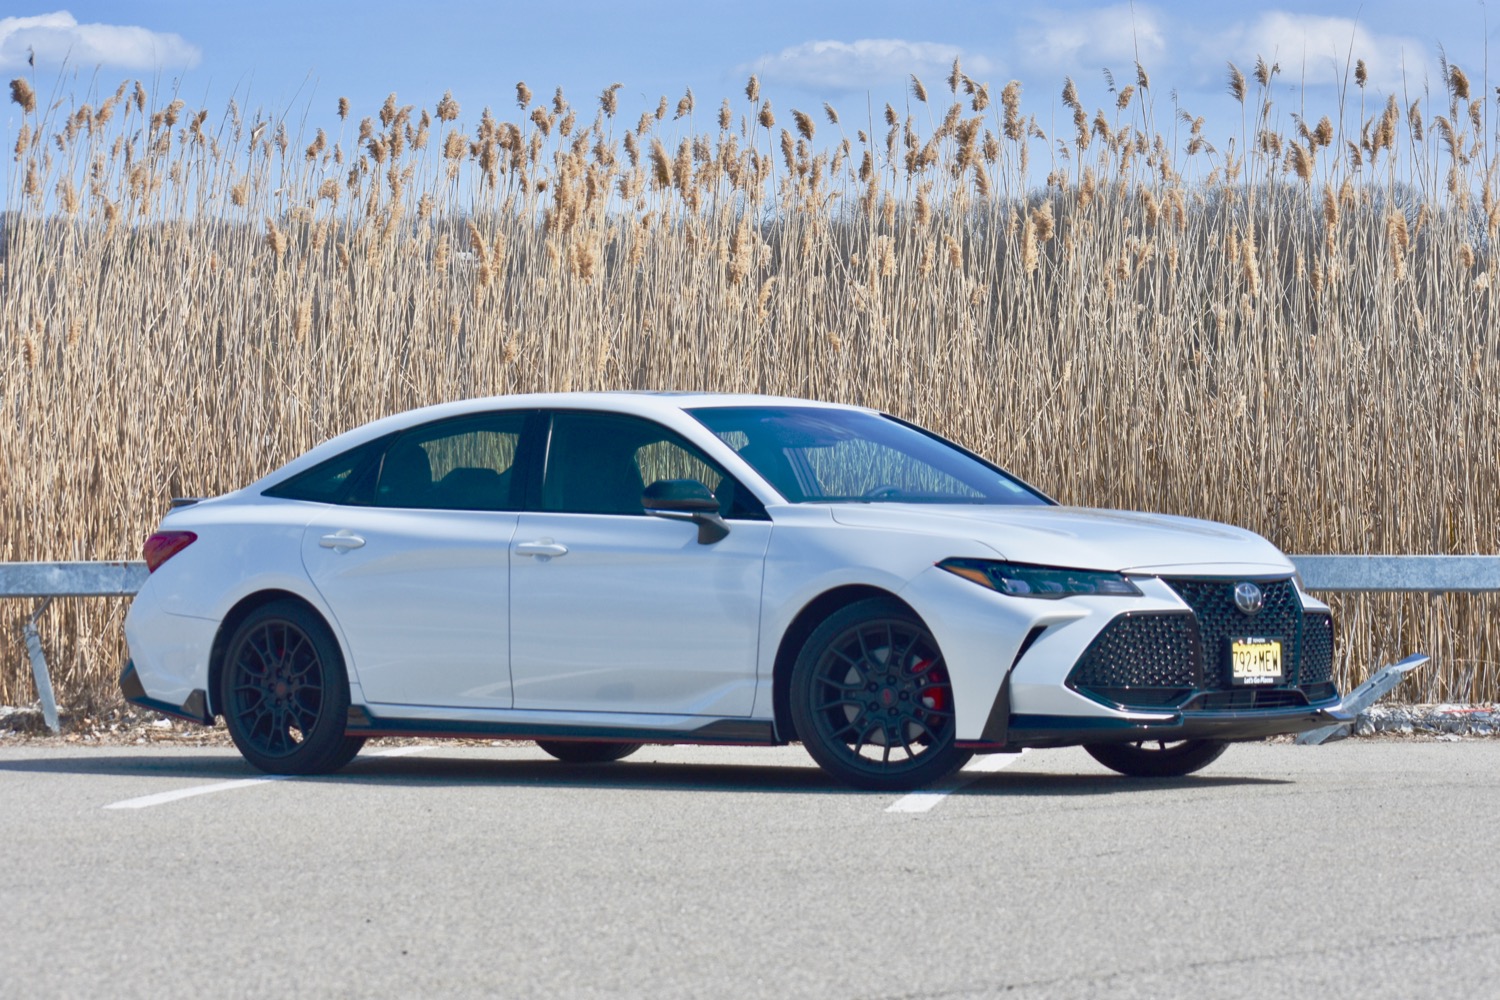 2020 Toyota Avalon TRD Review: Are We Having Fun yet? | Digital Trends